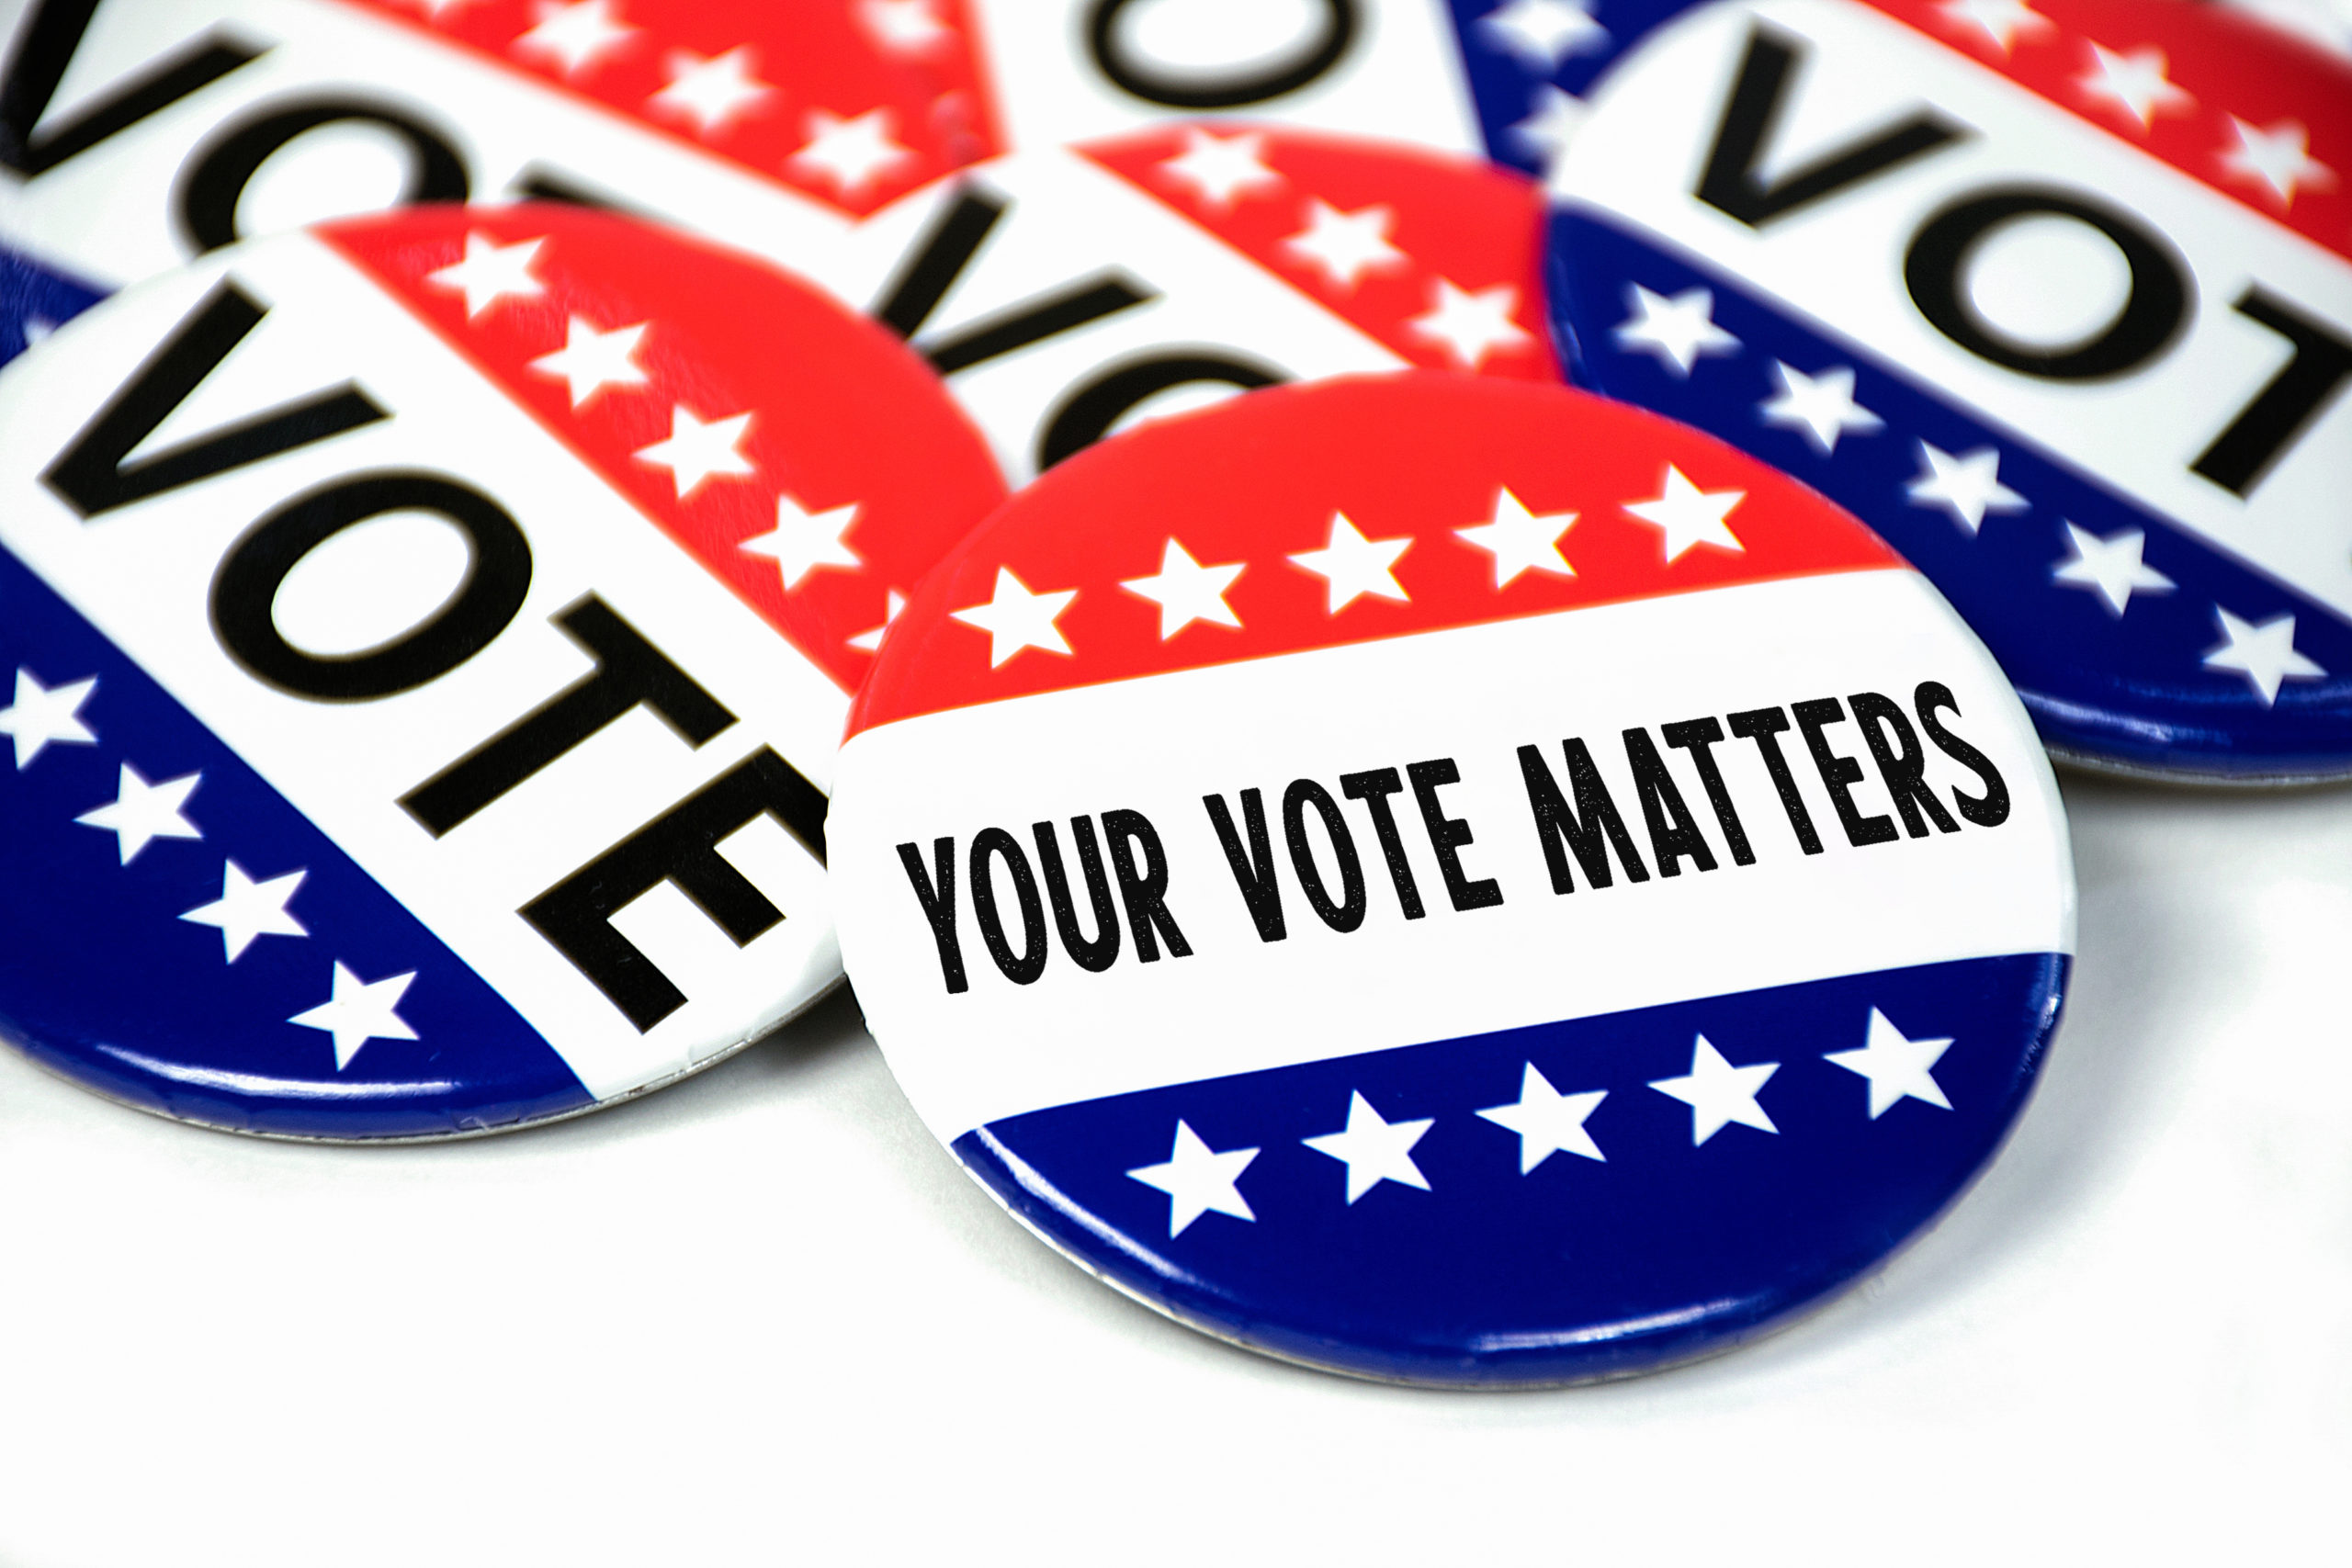 7 Things You Can Do to be Civically Engaged this Election Day